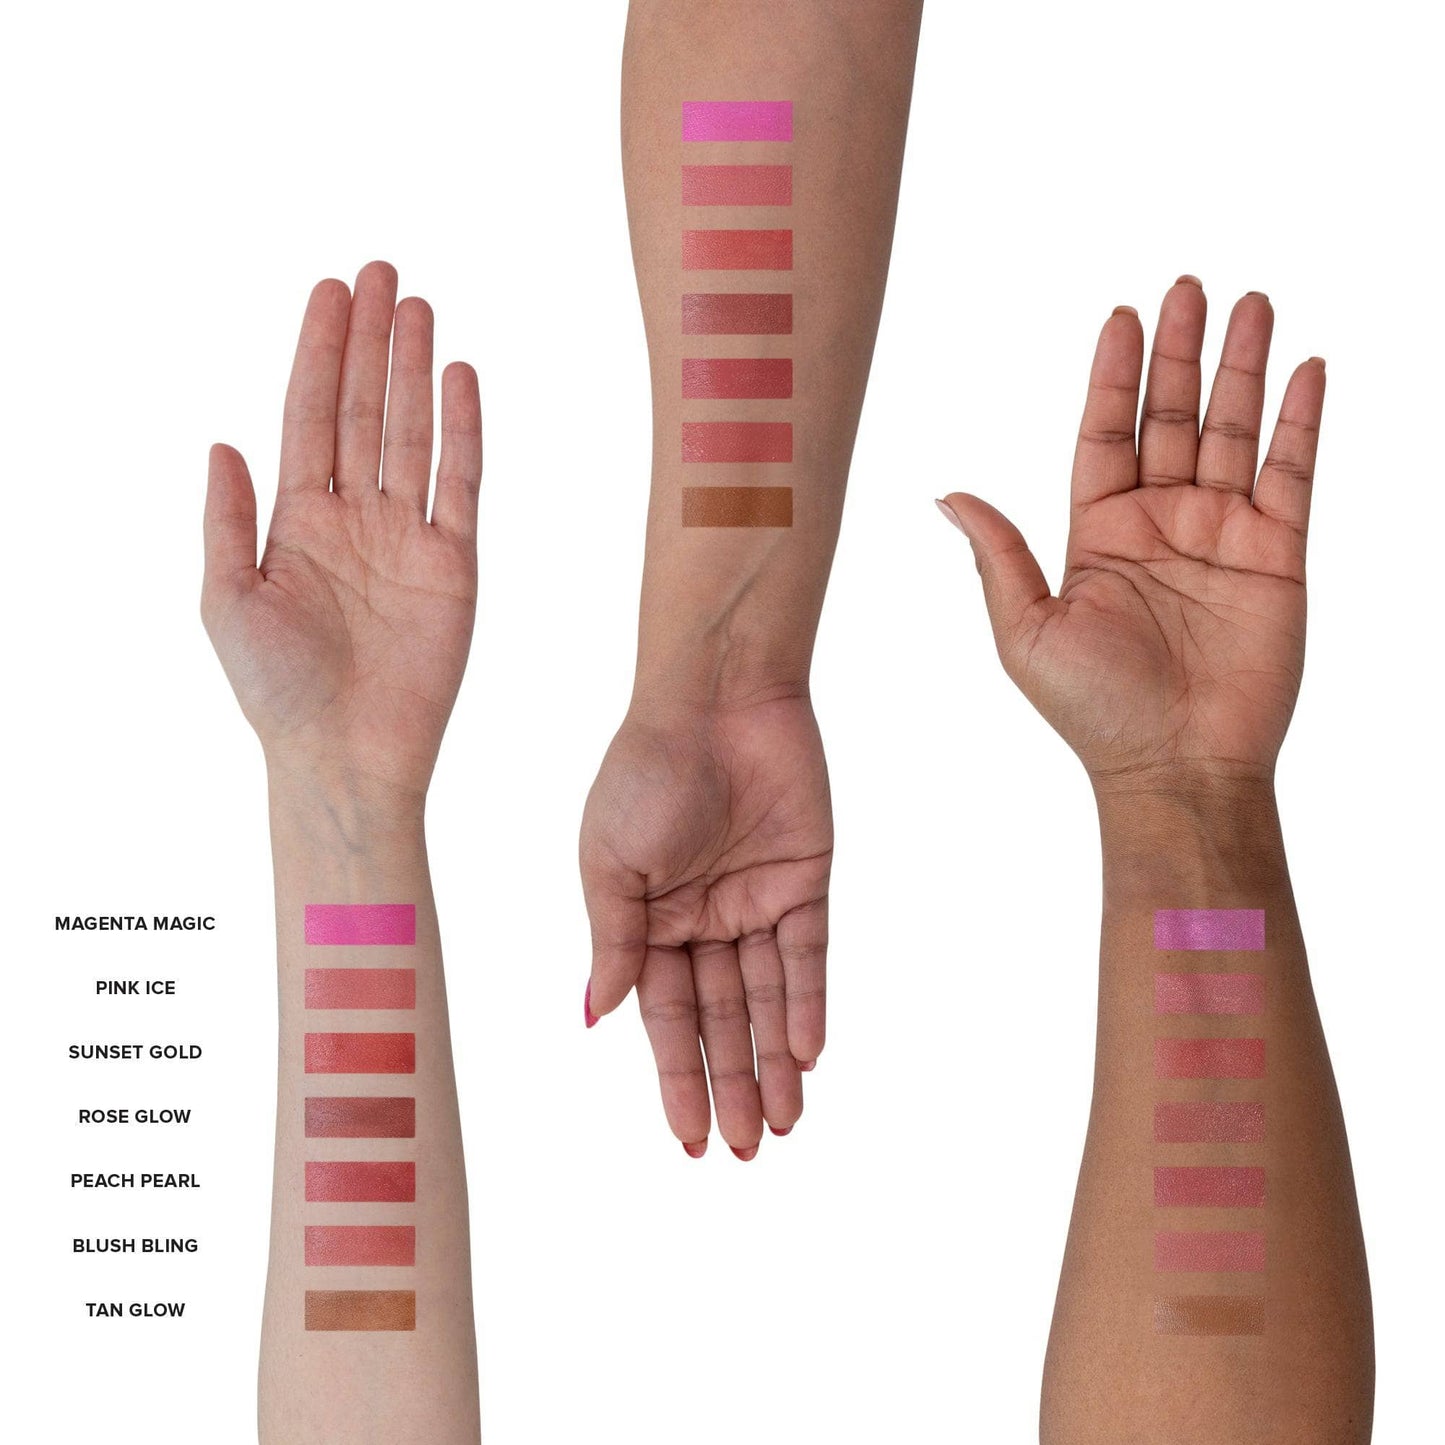 Blush Bling swatches